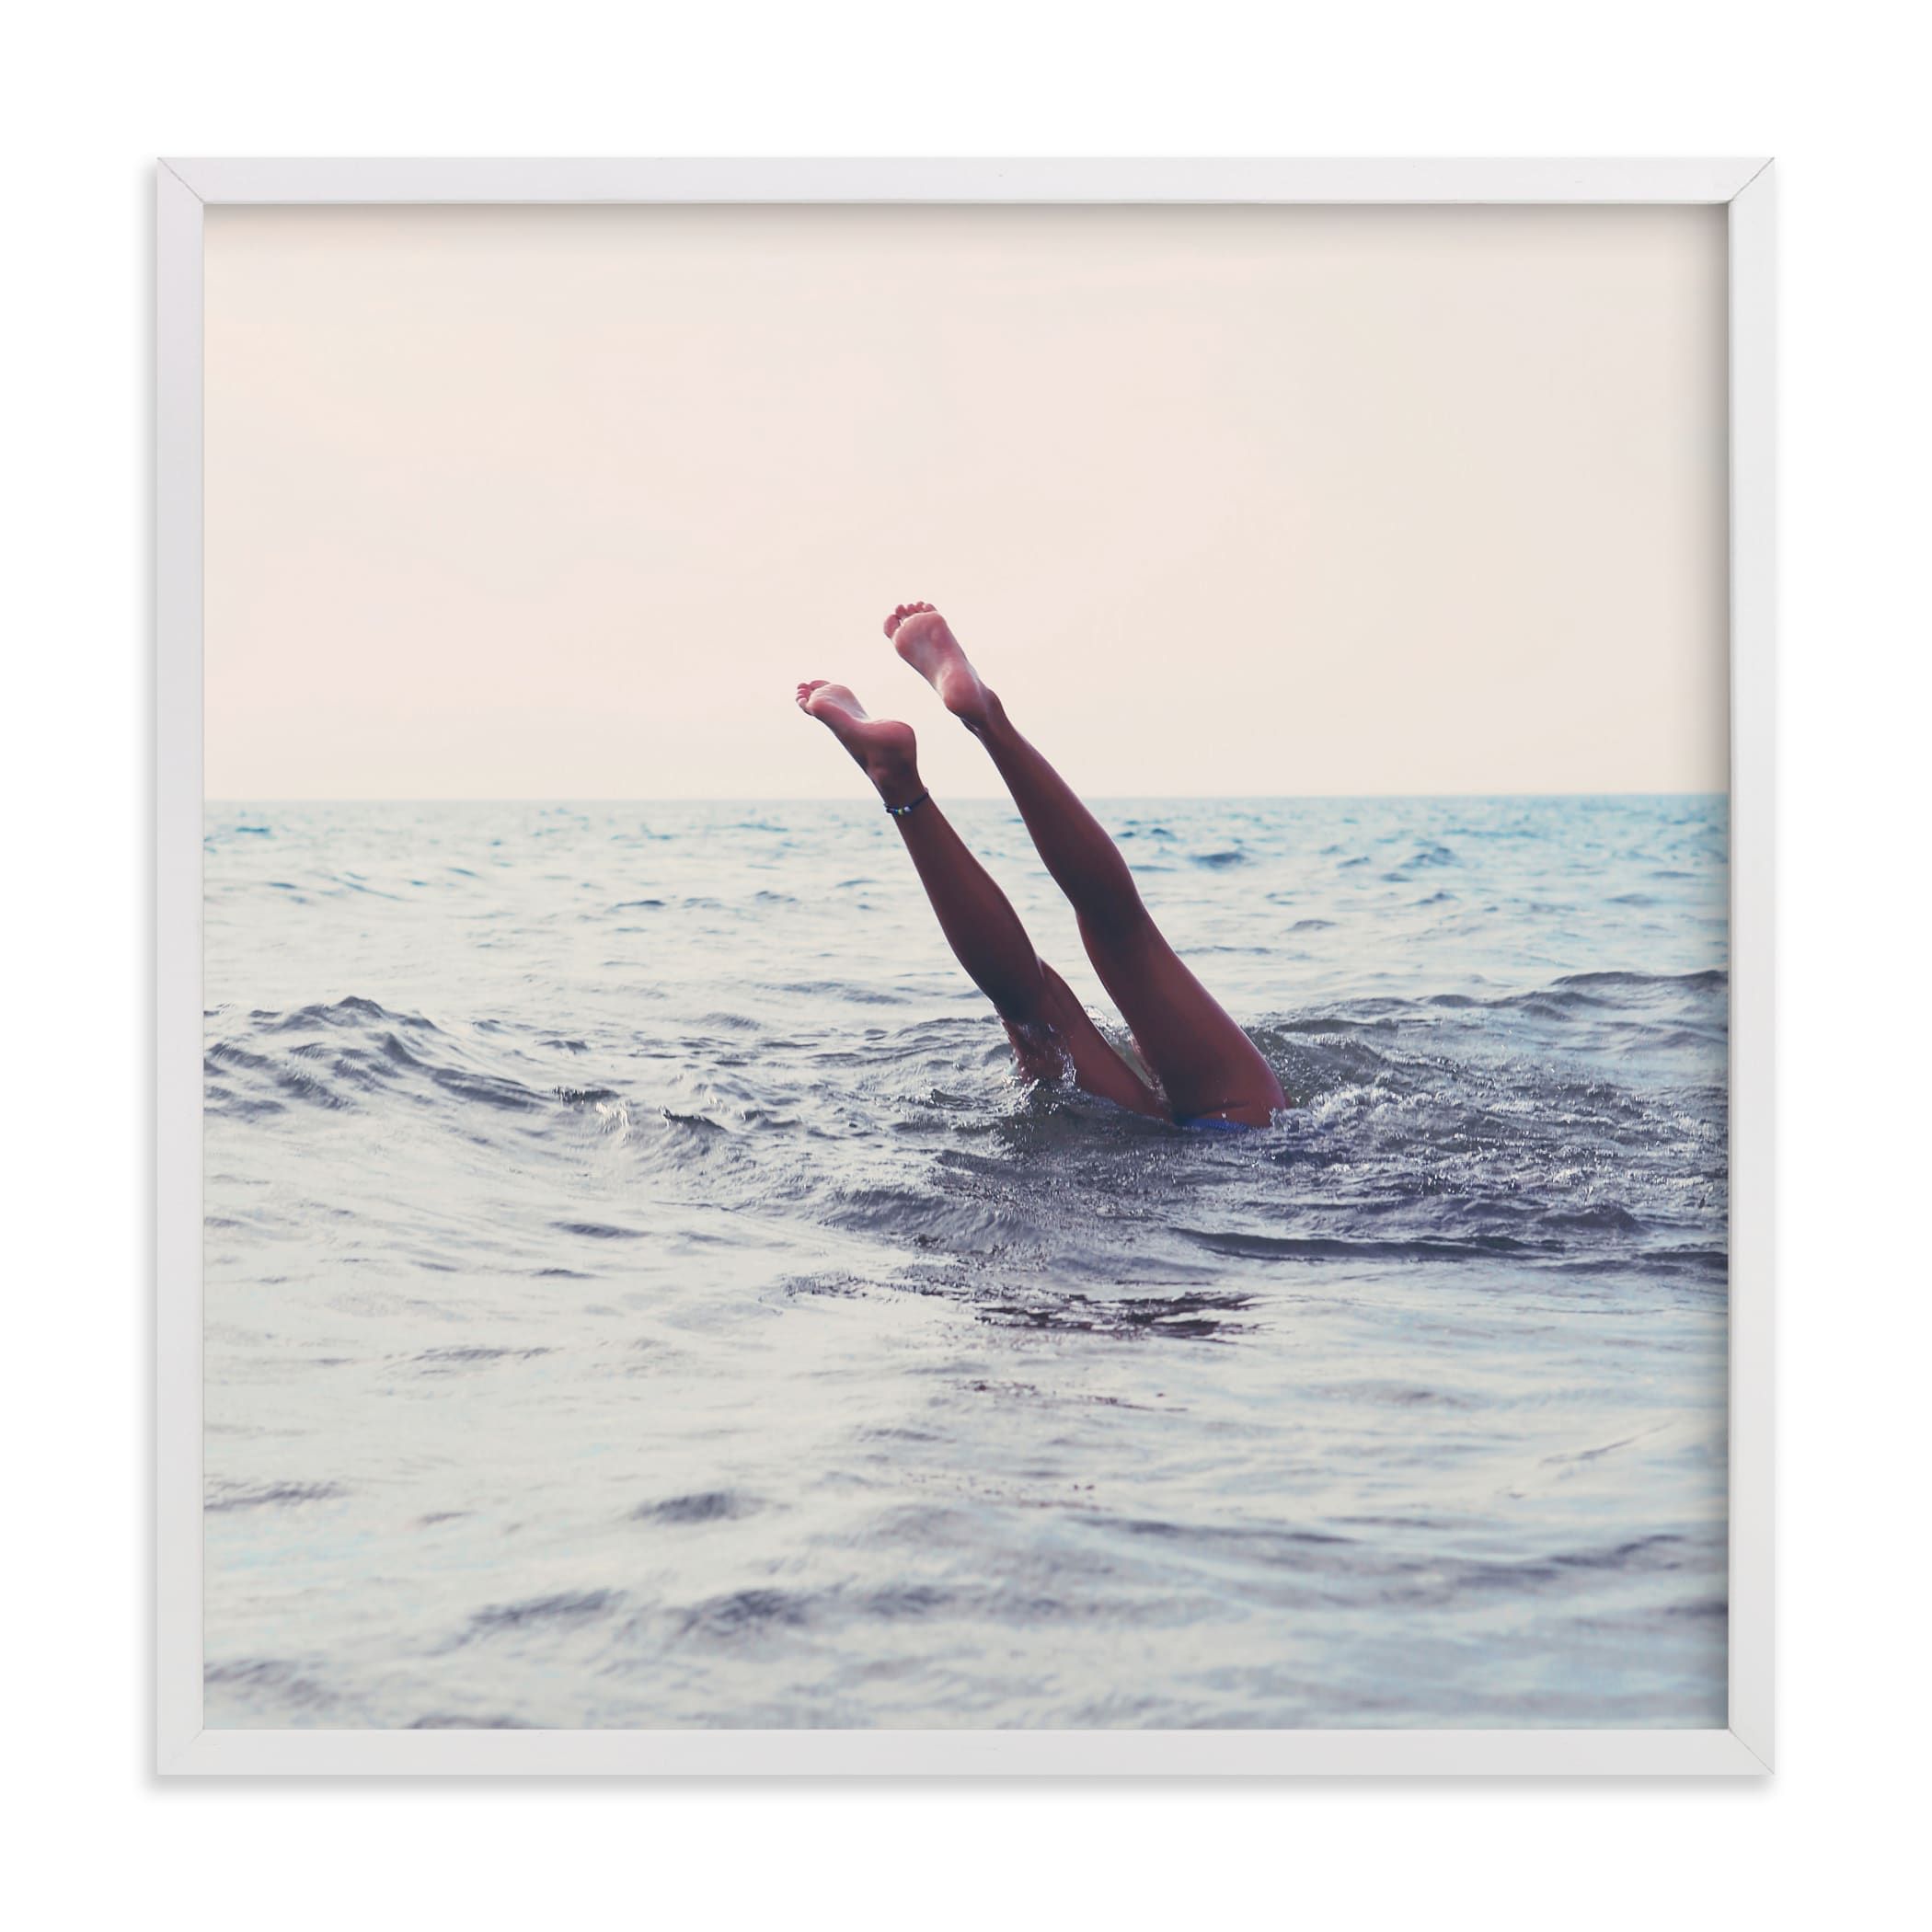 "Summer Handstand" - Photography Limited Edition Art Print by ALICIA BOCK. | Minted